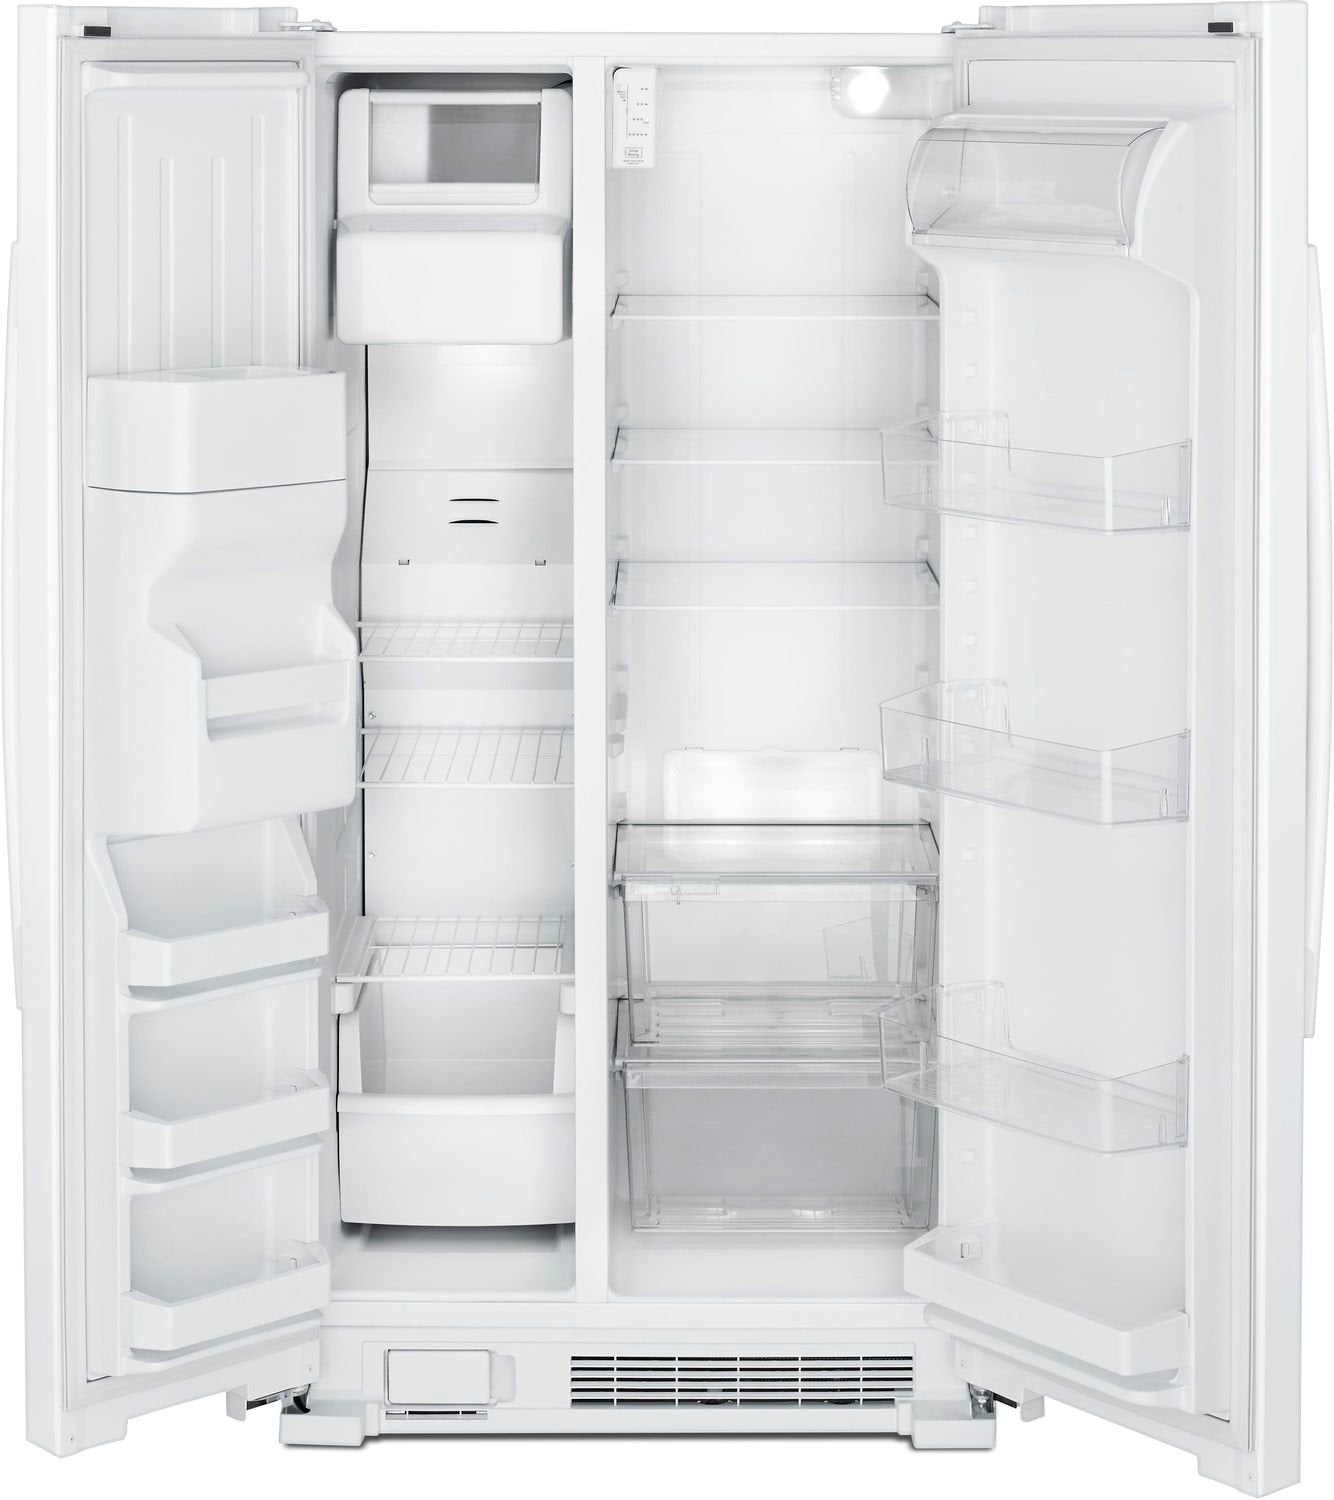 Amana White Side-by-Side Refrigerator (21.4 Cu. Ft.) - ASI2175GRW